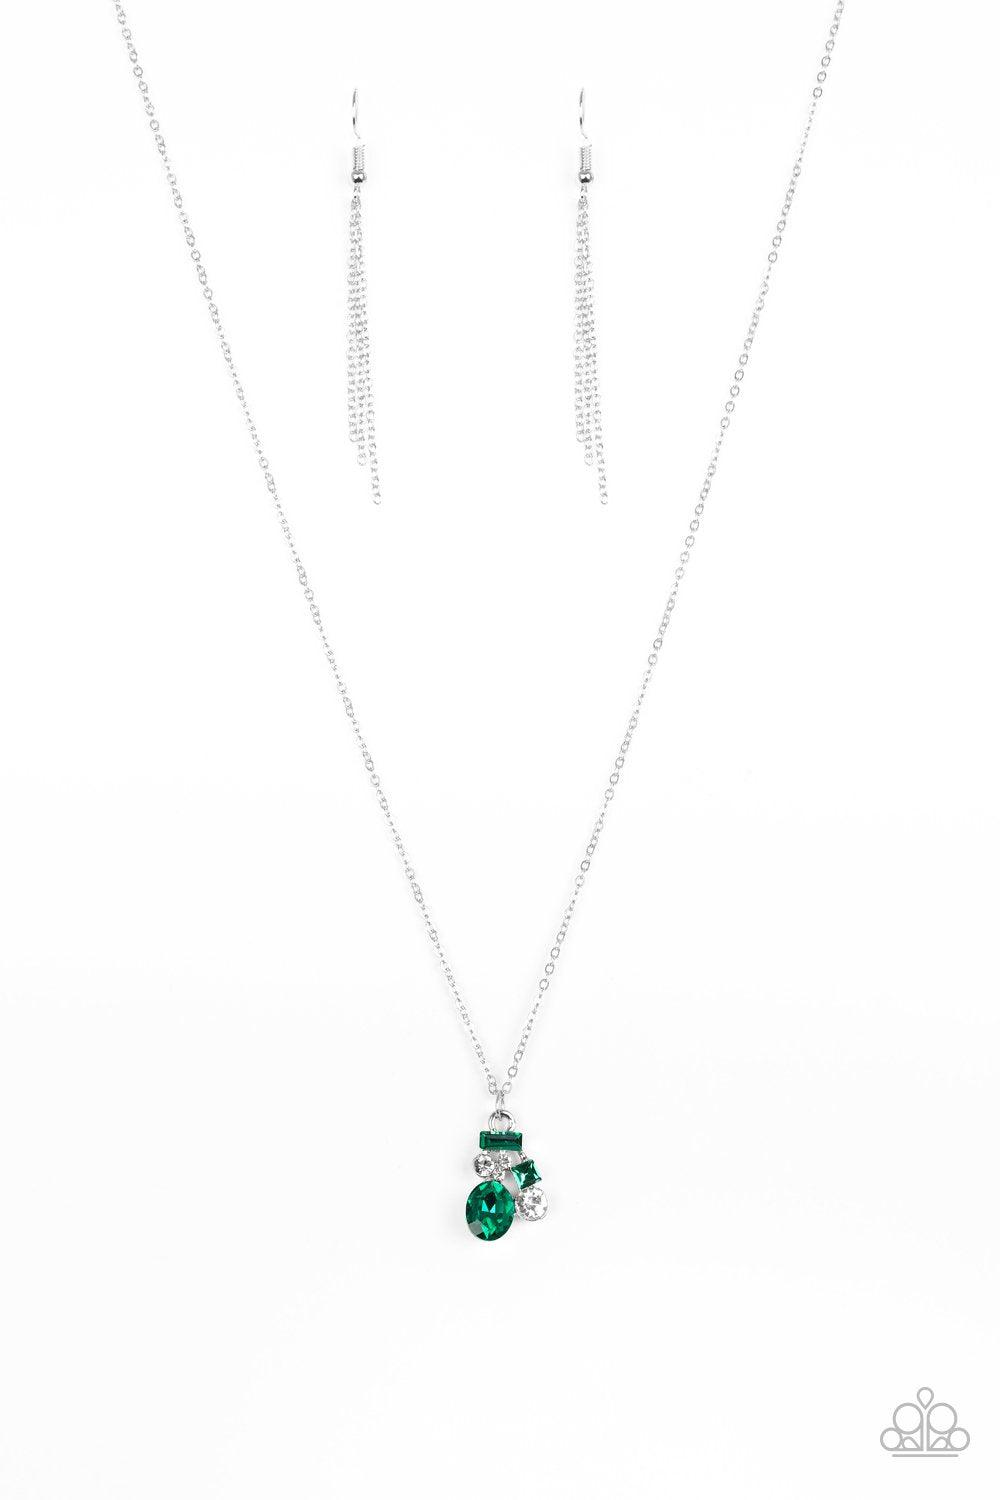 Time to Be Timeless Green and White Rhinestone Necklace - Paparazzi Accessories-CarasShop.com - $5 Jewelry by Cara Jewels